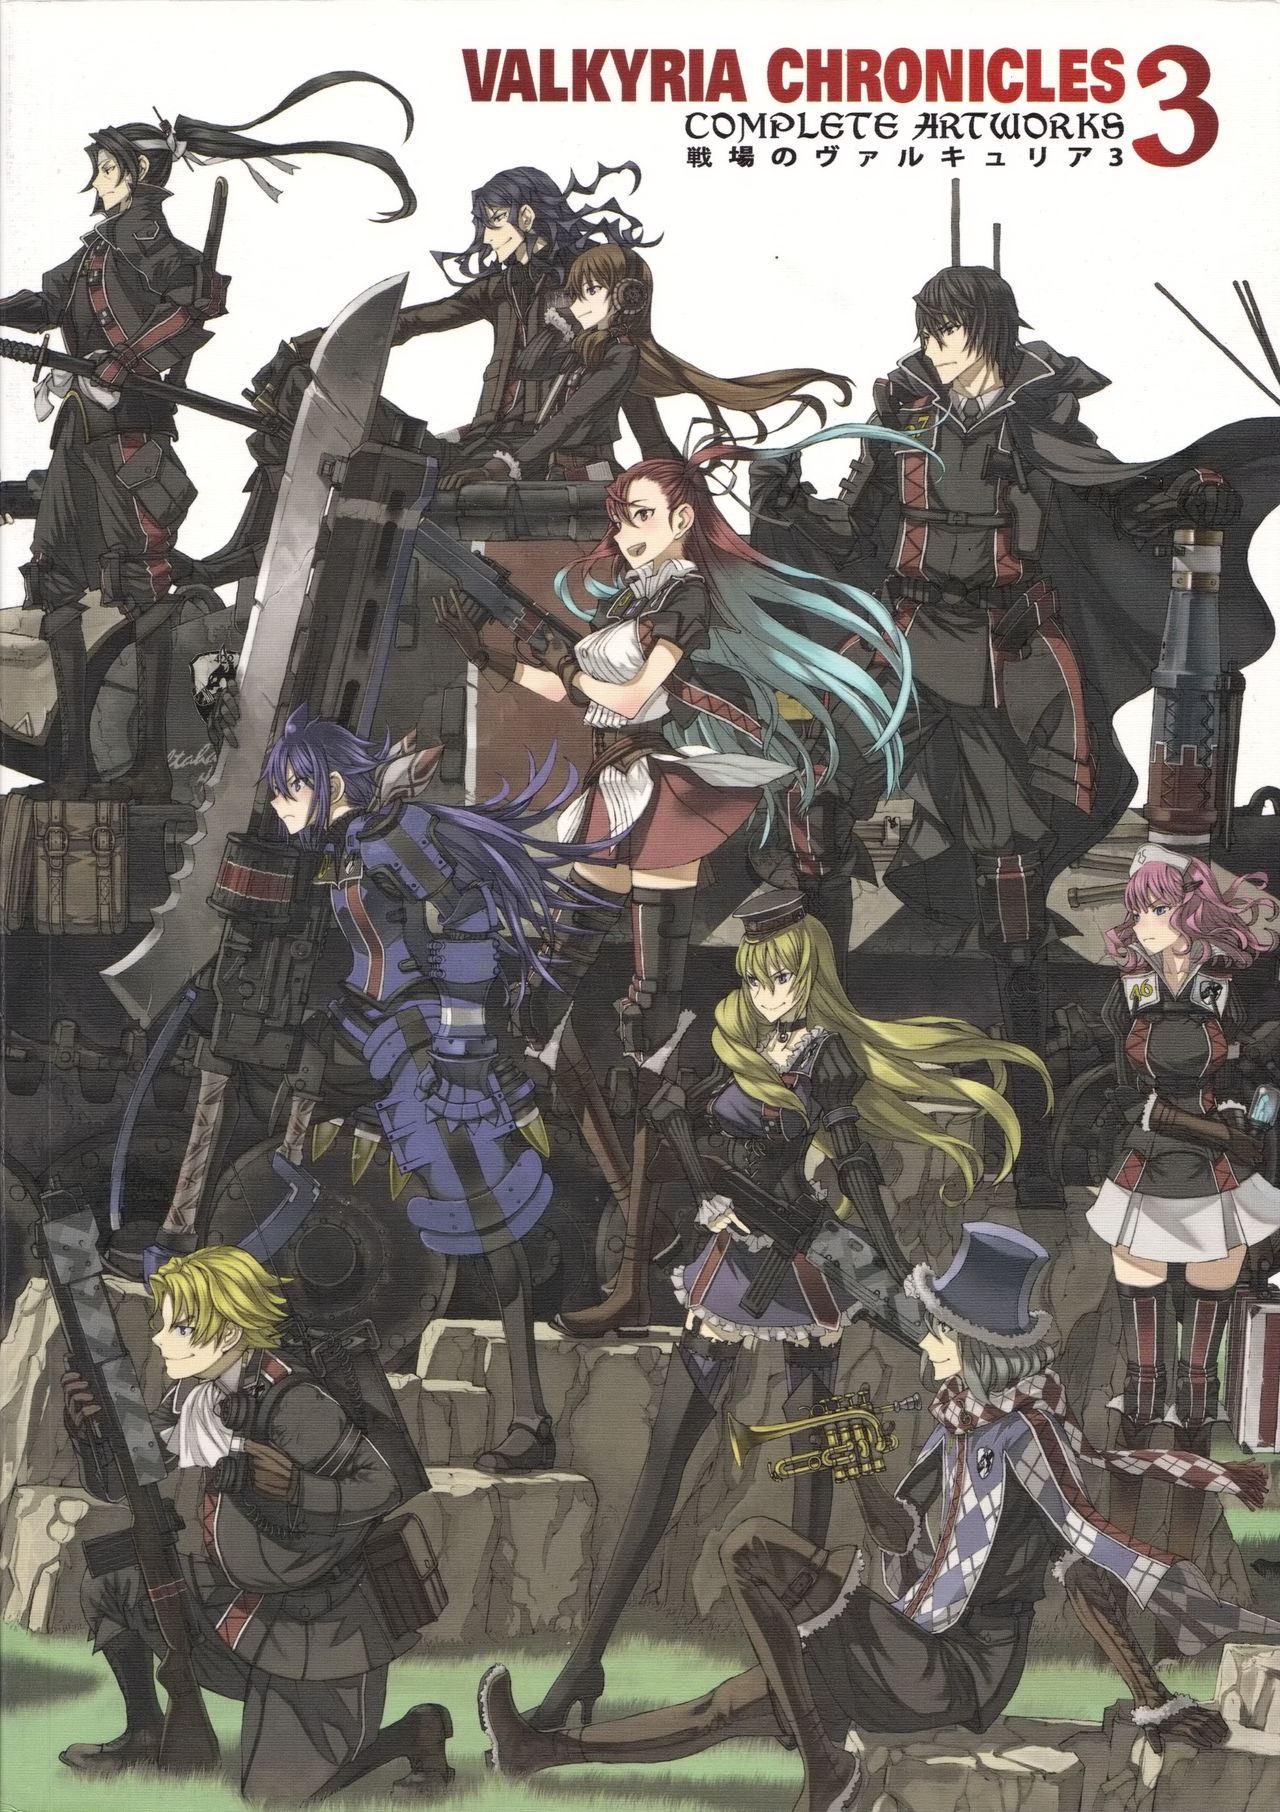 Valkyria Chronicles 3 complete artworks english 000